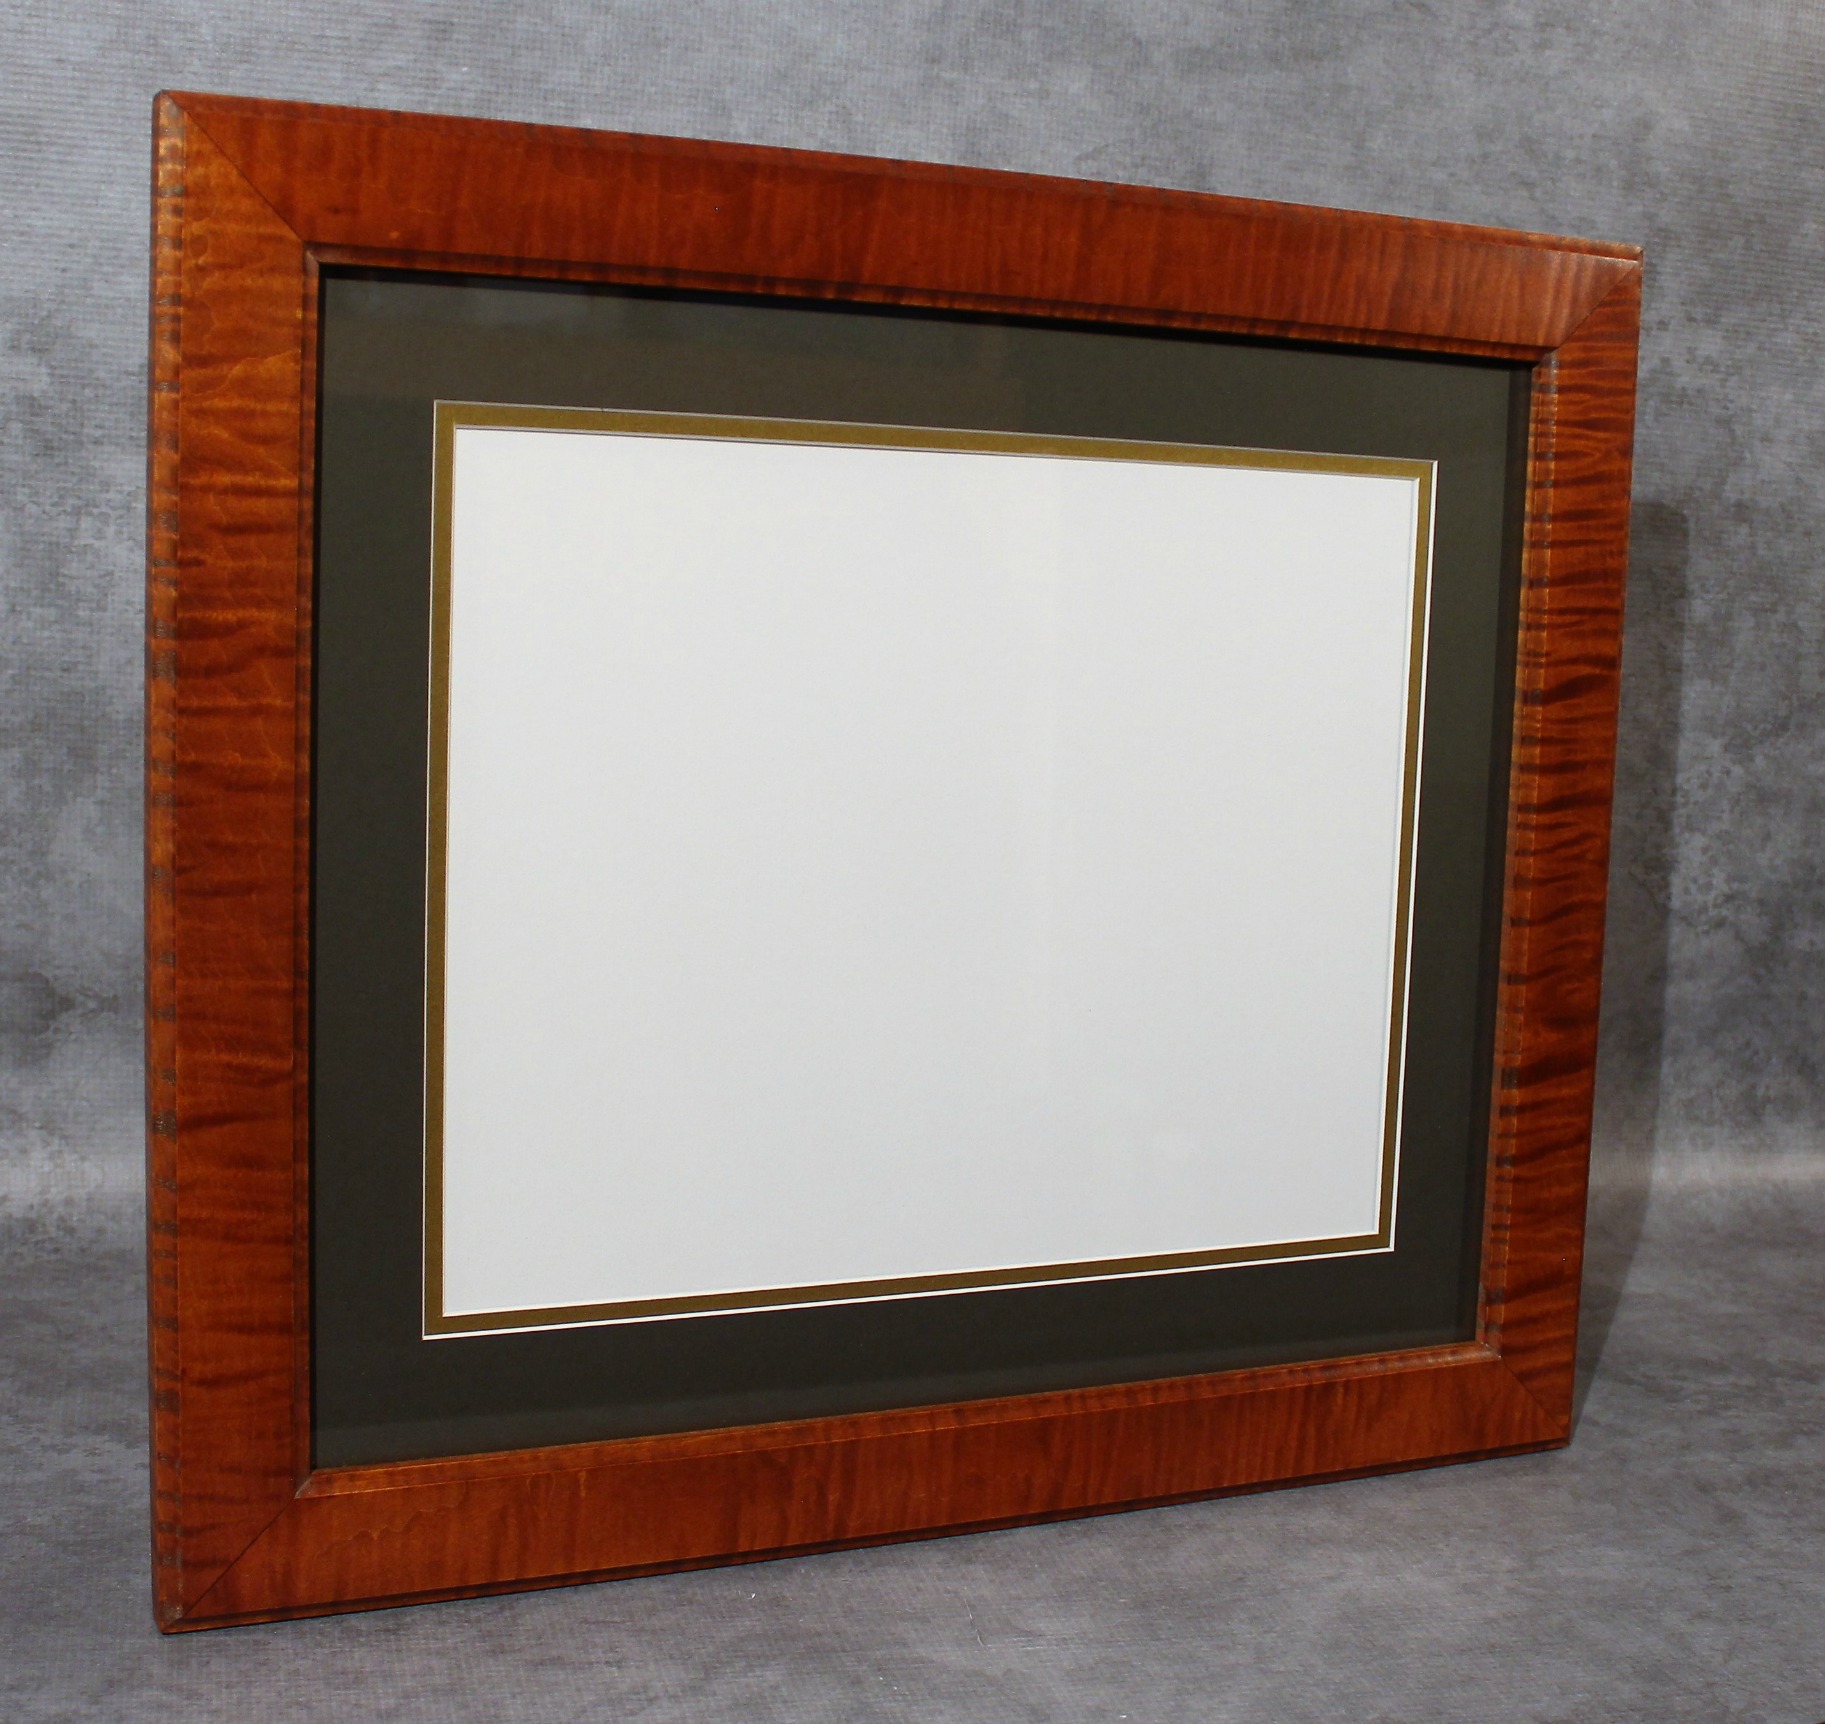 Make by yourself a frame of frames !